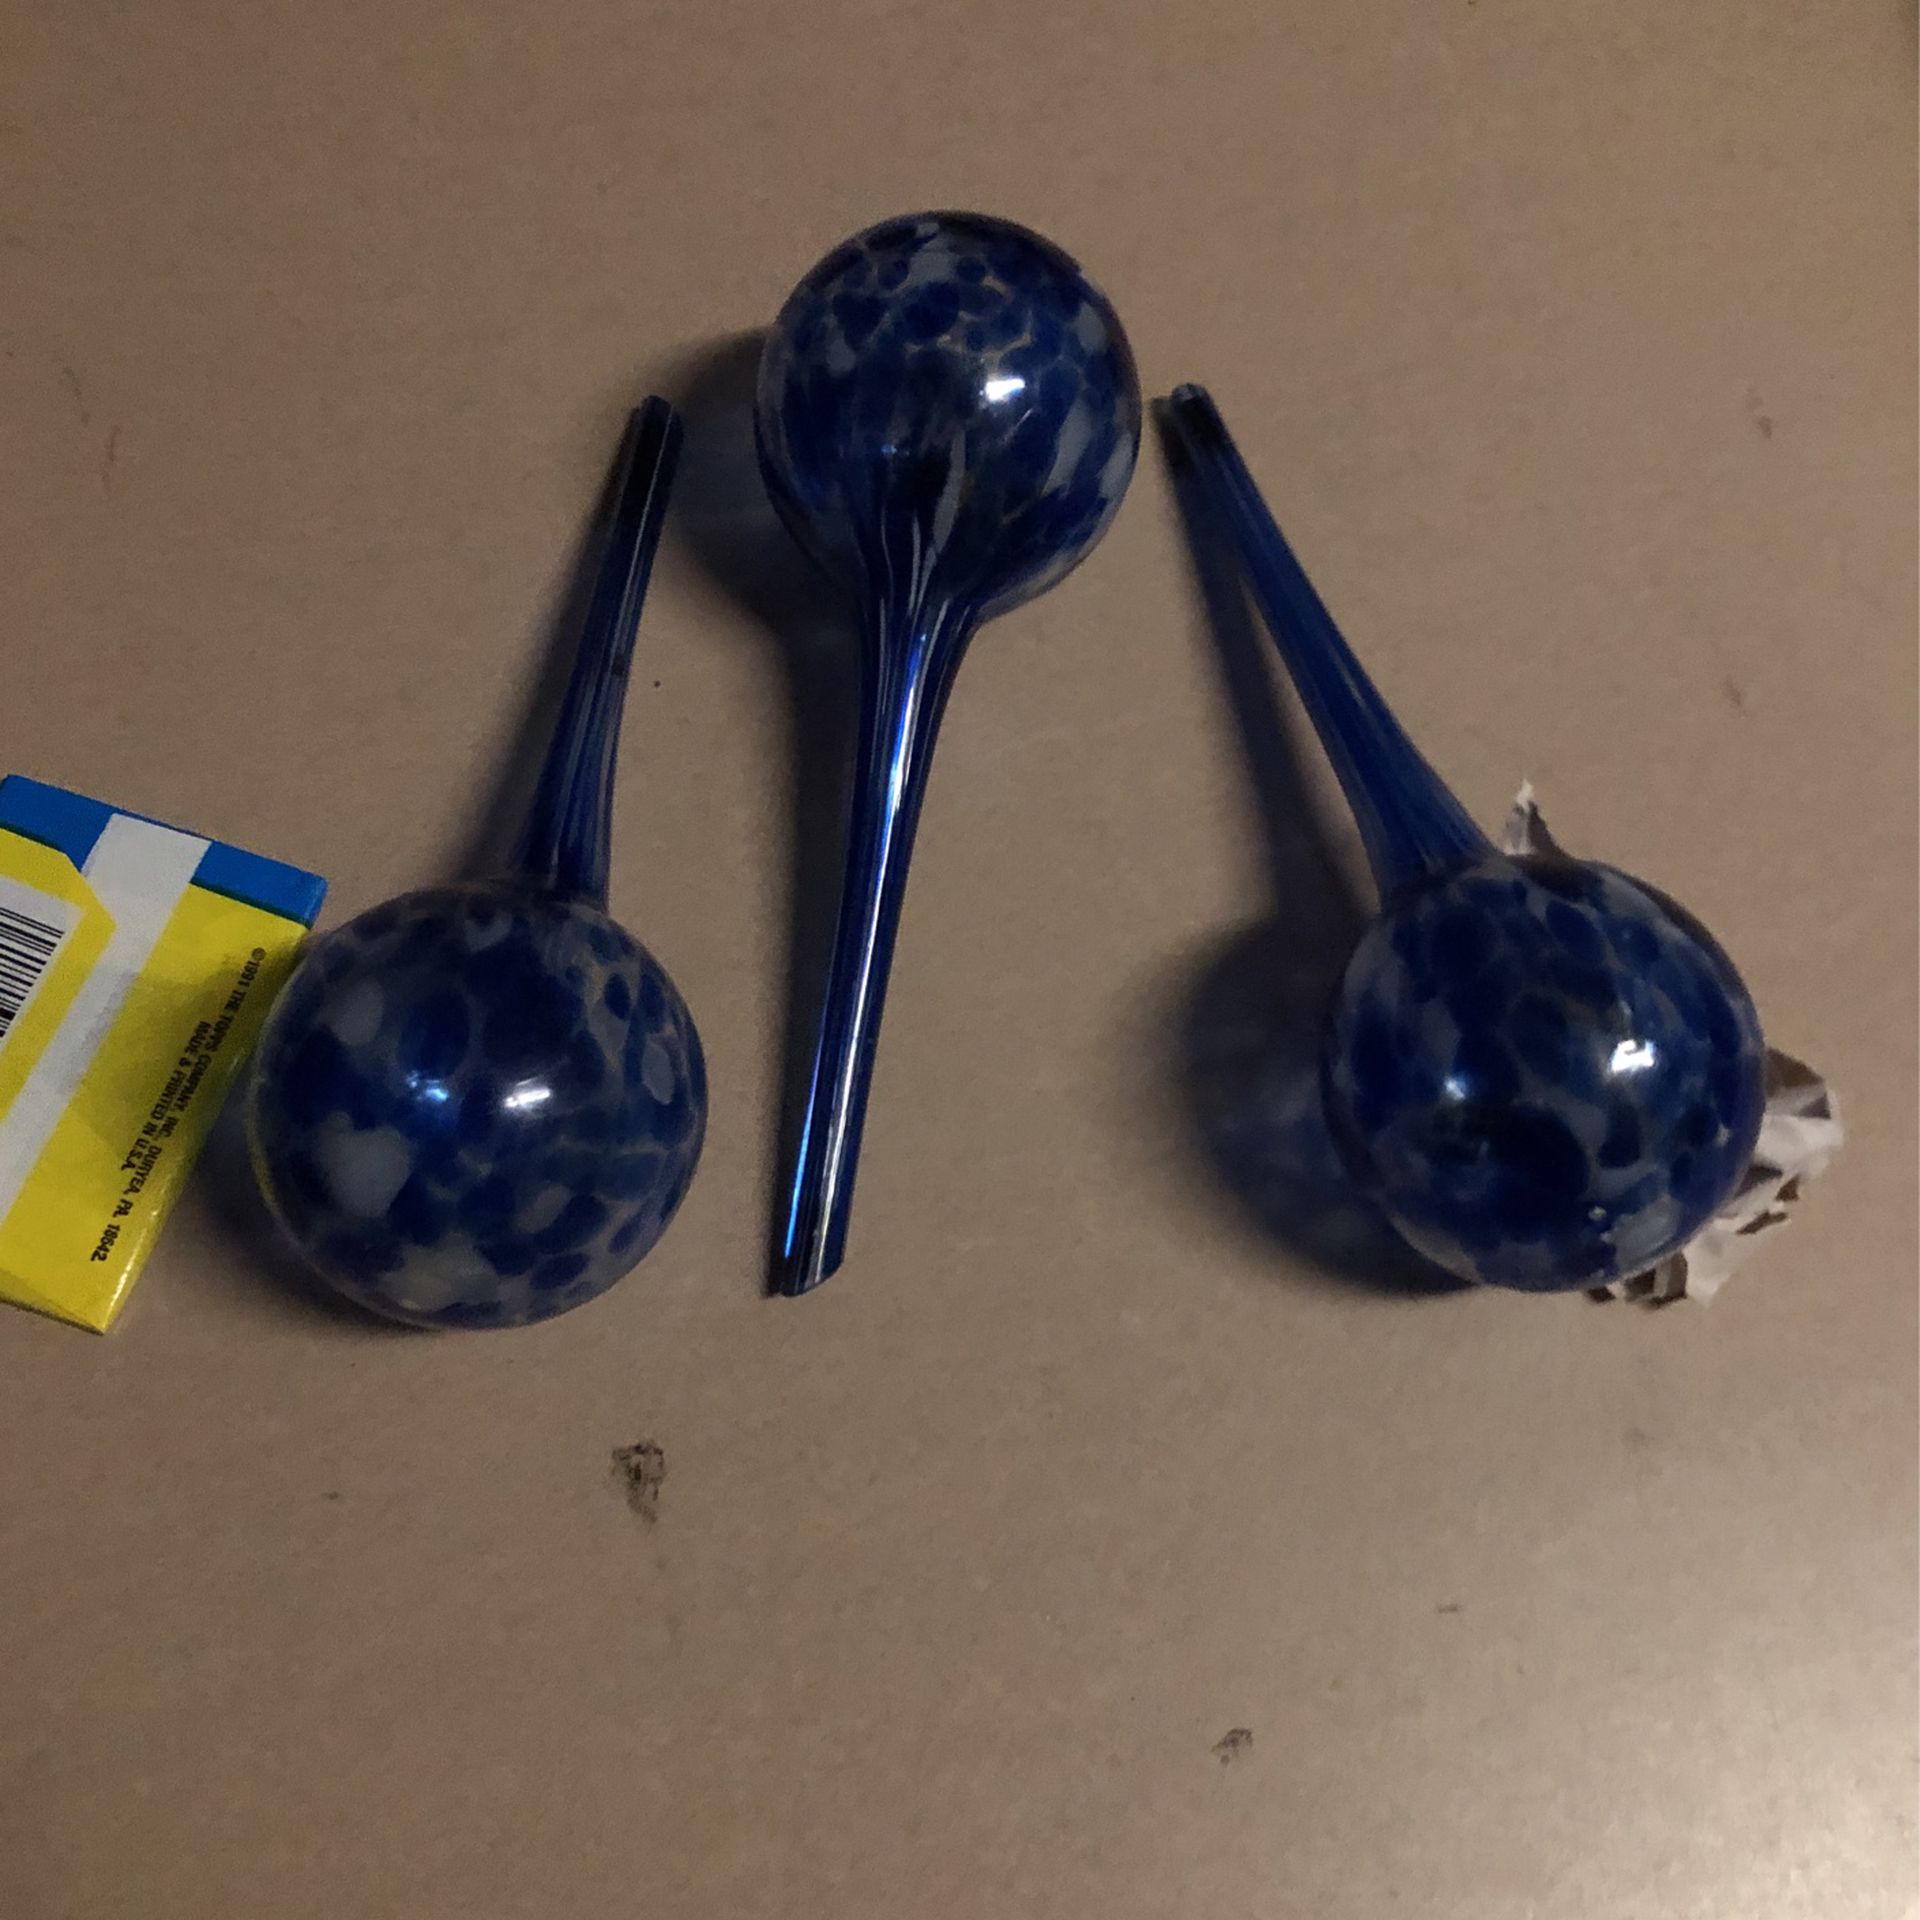 3 Glass Plant Watering Globes